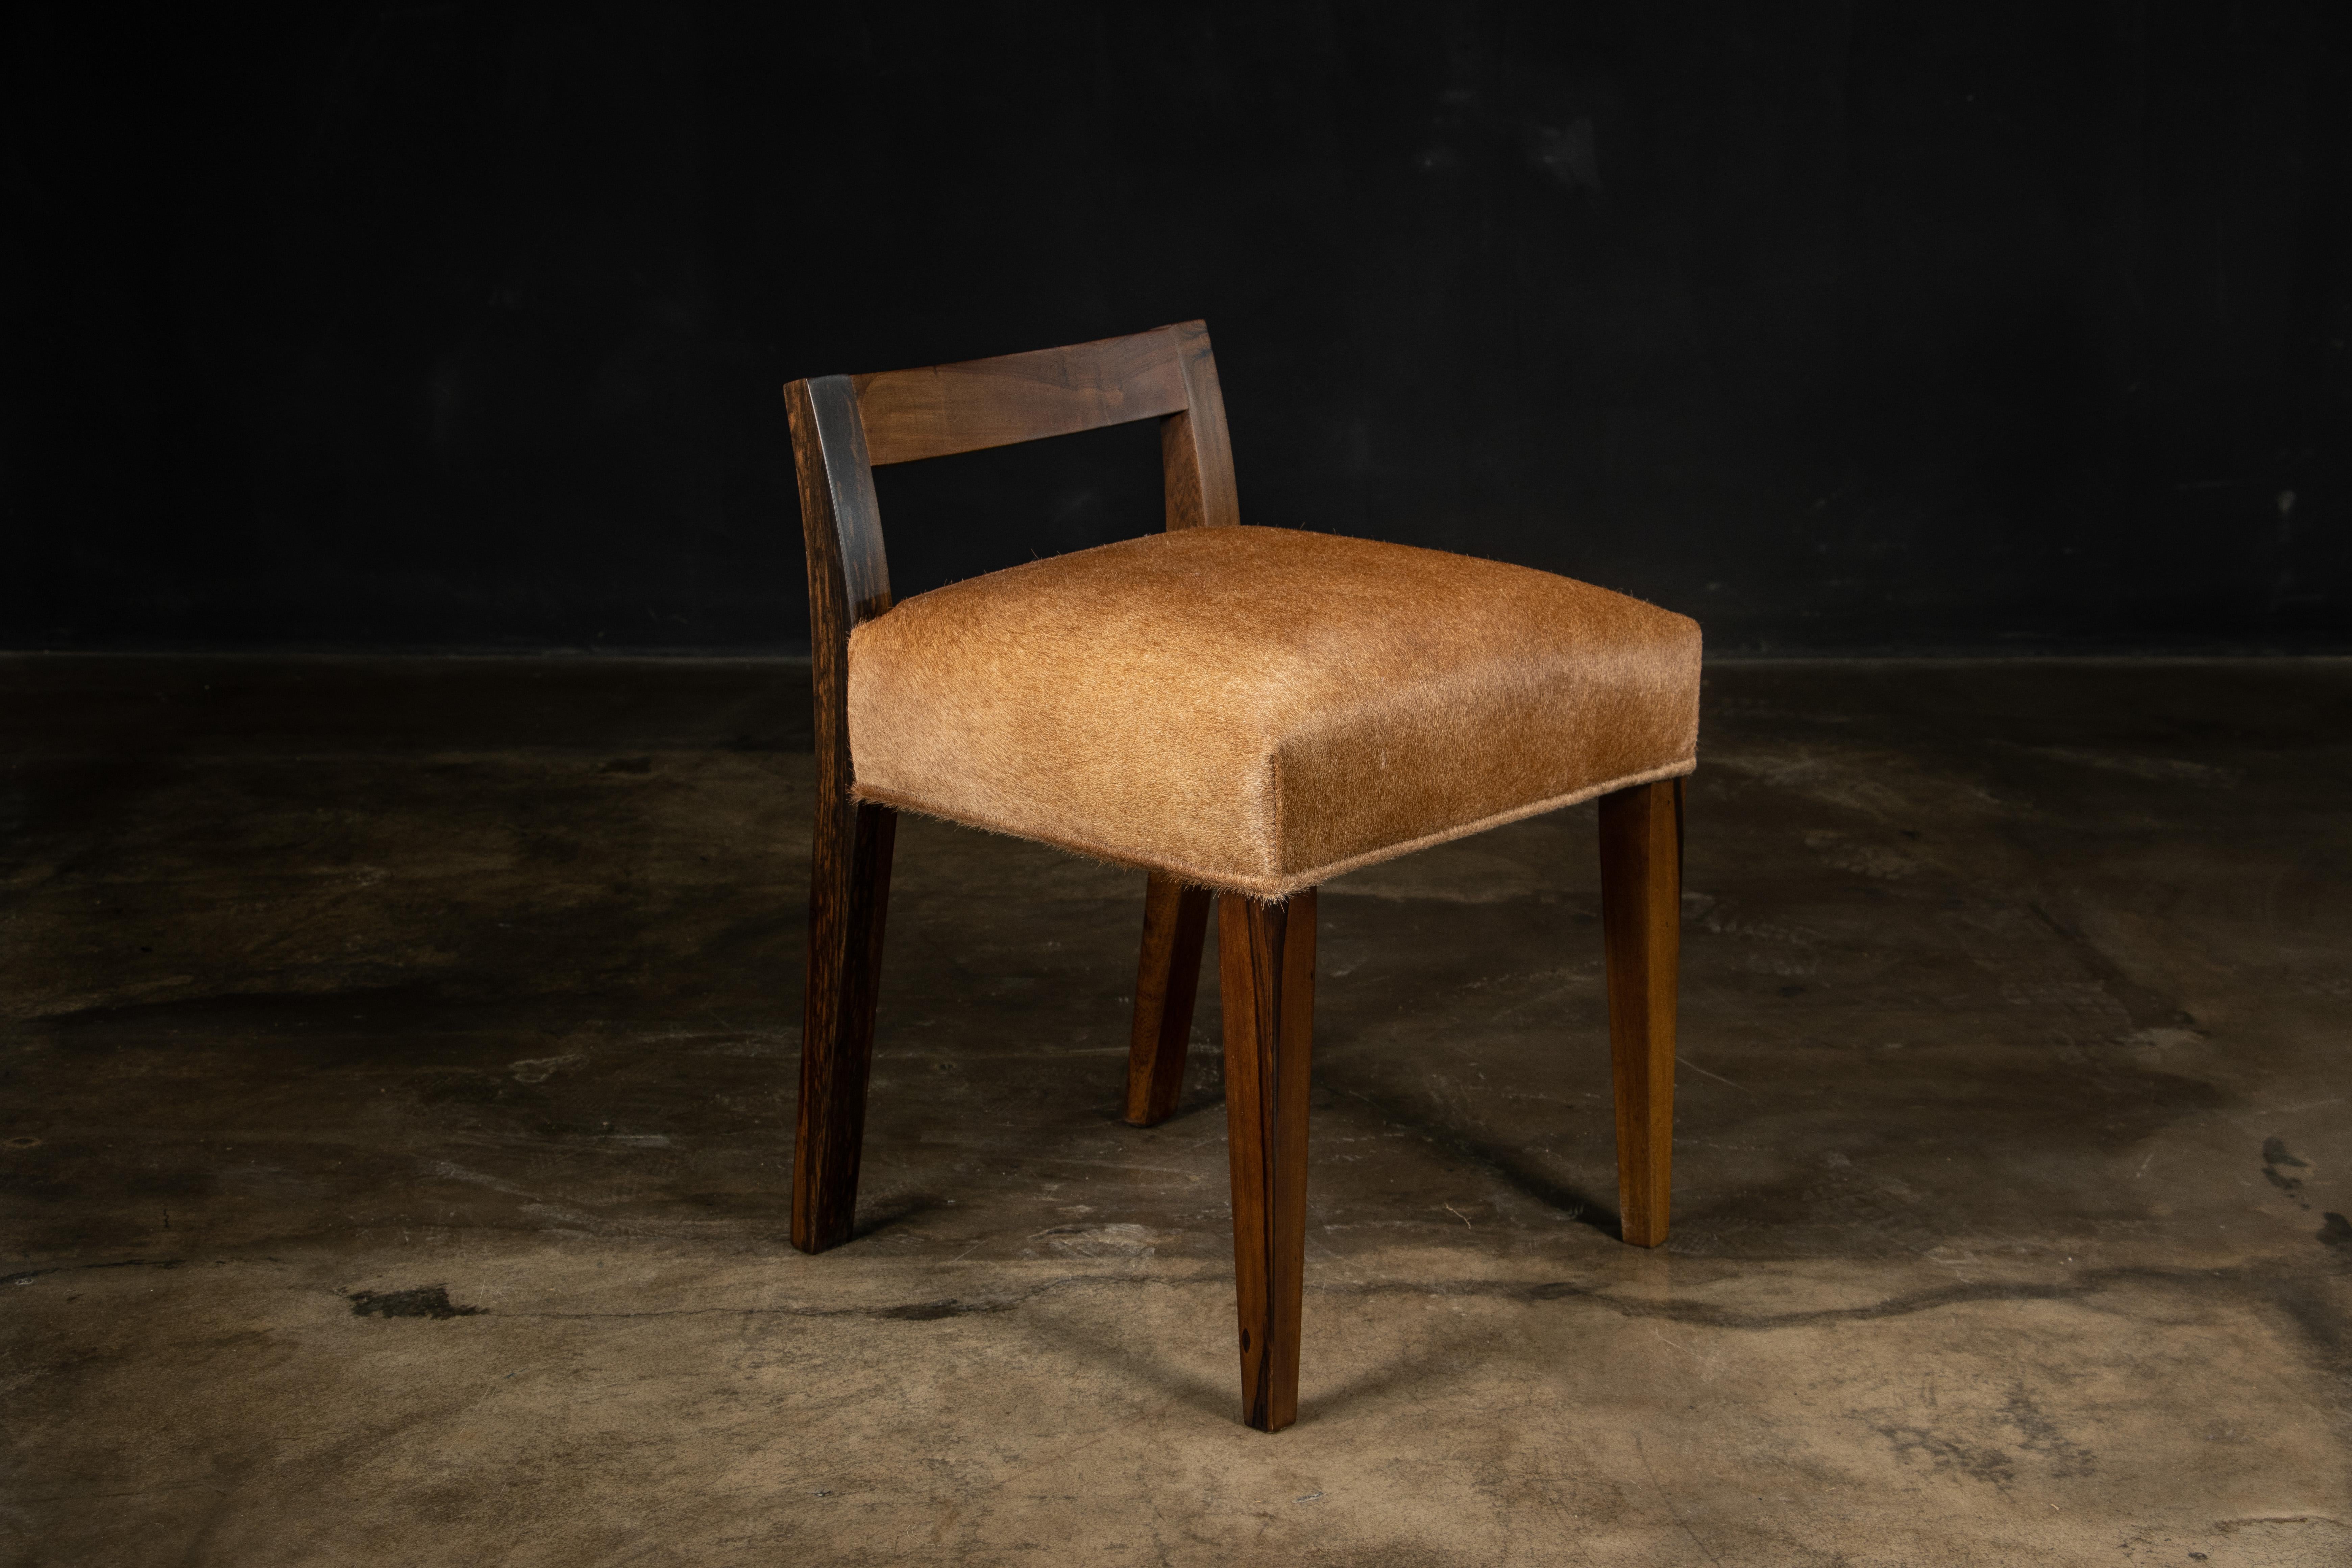 Umberto Modern Low Dining Chair in Sustainably Sourced Exotic Argentine Rosewood & Hair Hide from Costantini Design 

The Umberto Chair is one of Costantini’s original seating designs, featuring a modern, low, carved solid wood back with a tight